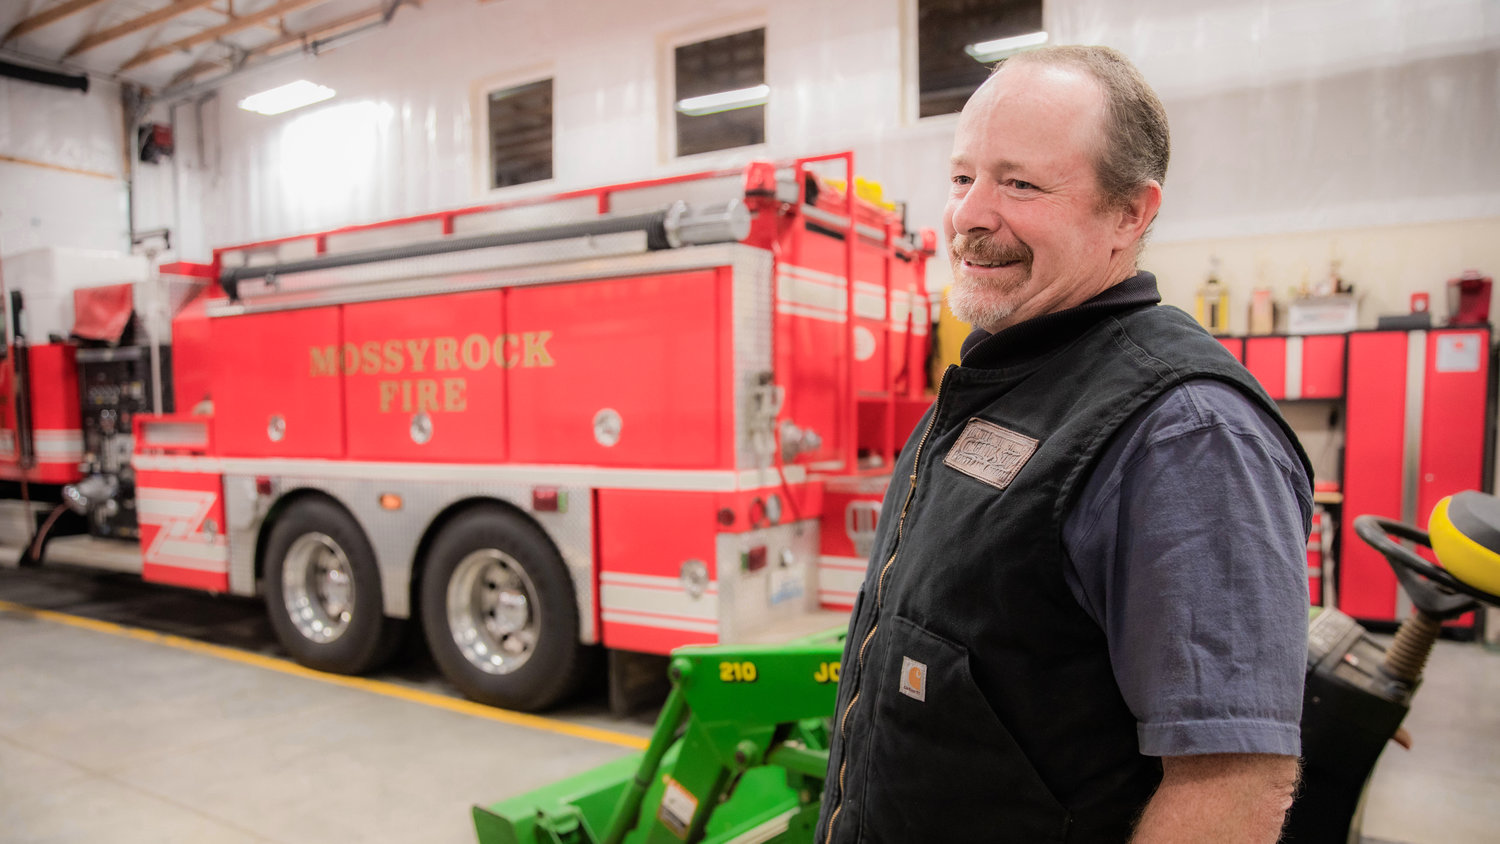 Marty Majors smiles while talking about the work firefighters do Monday night at the Lewis County Fire District 3 building in Mossyrock.